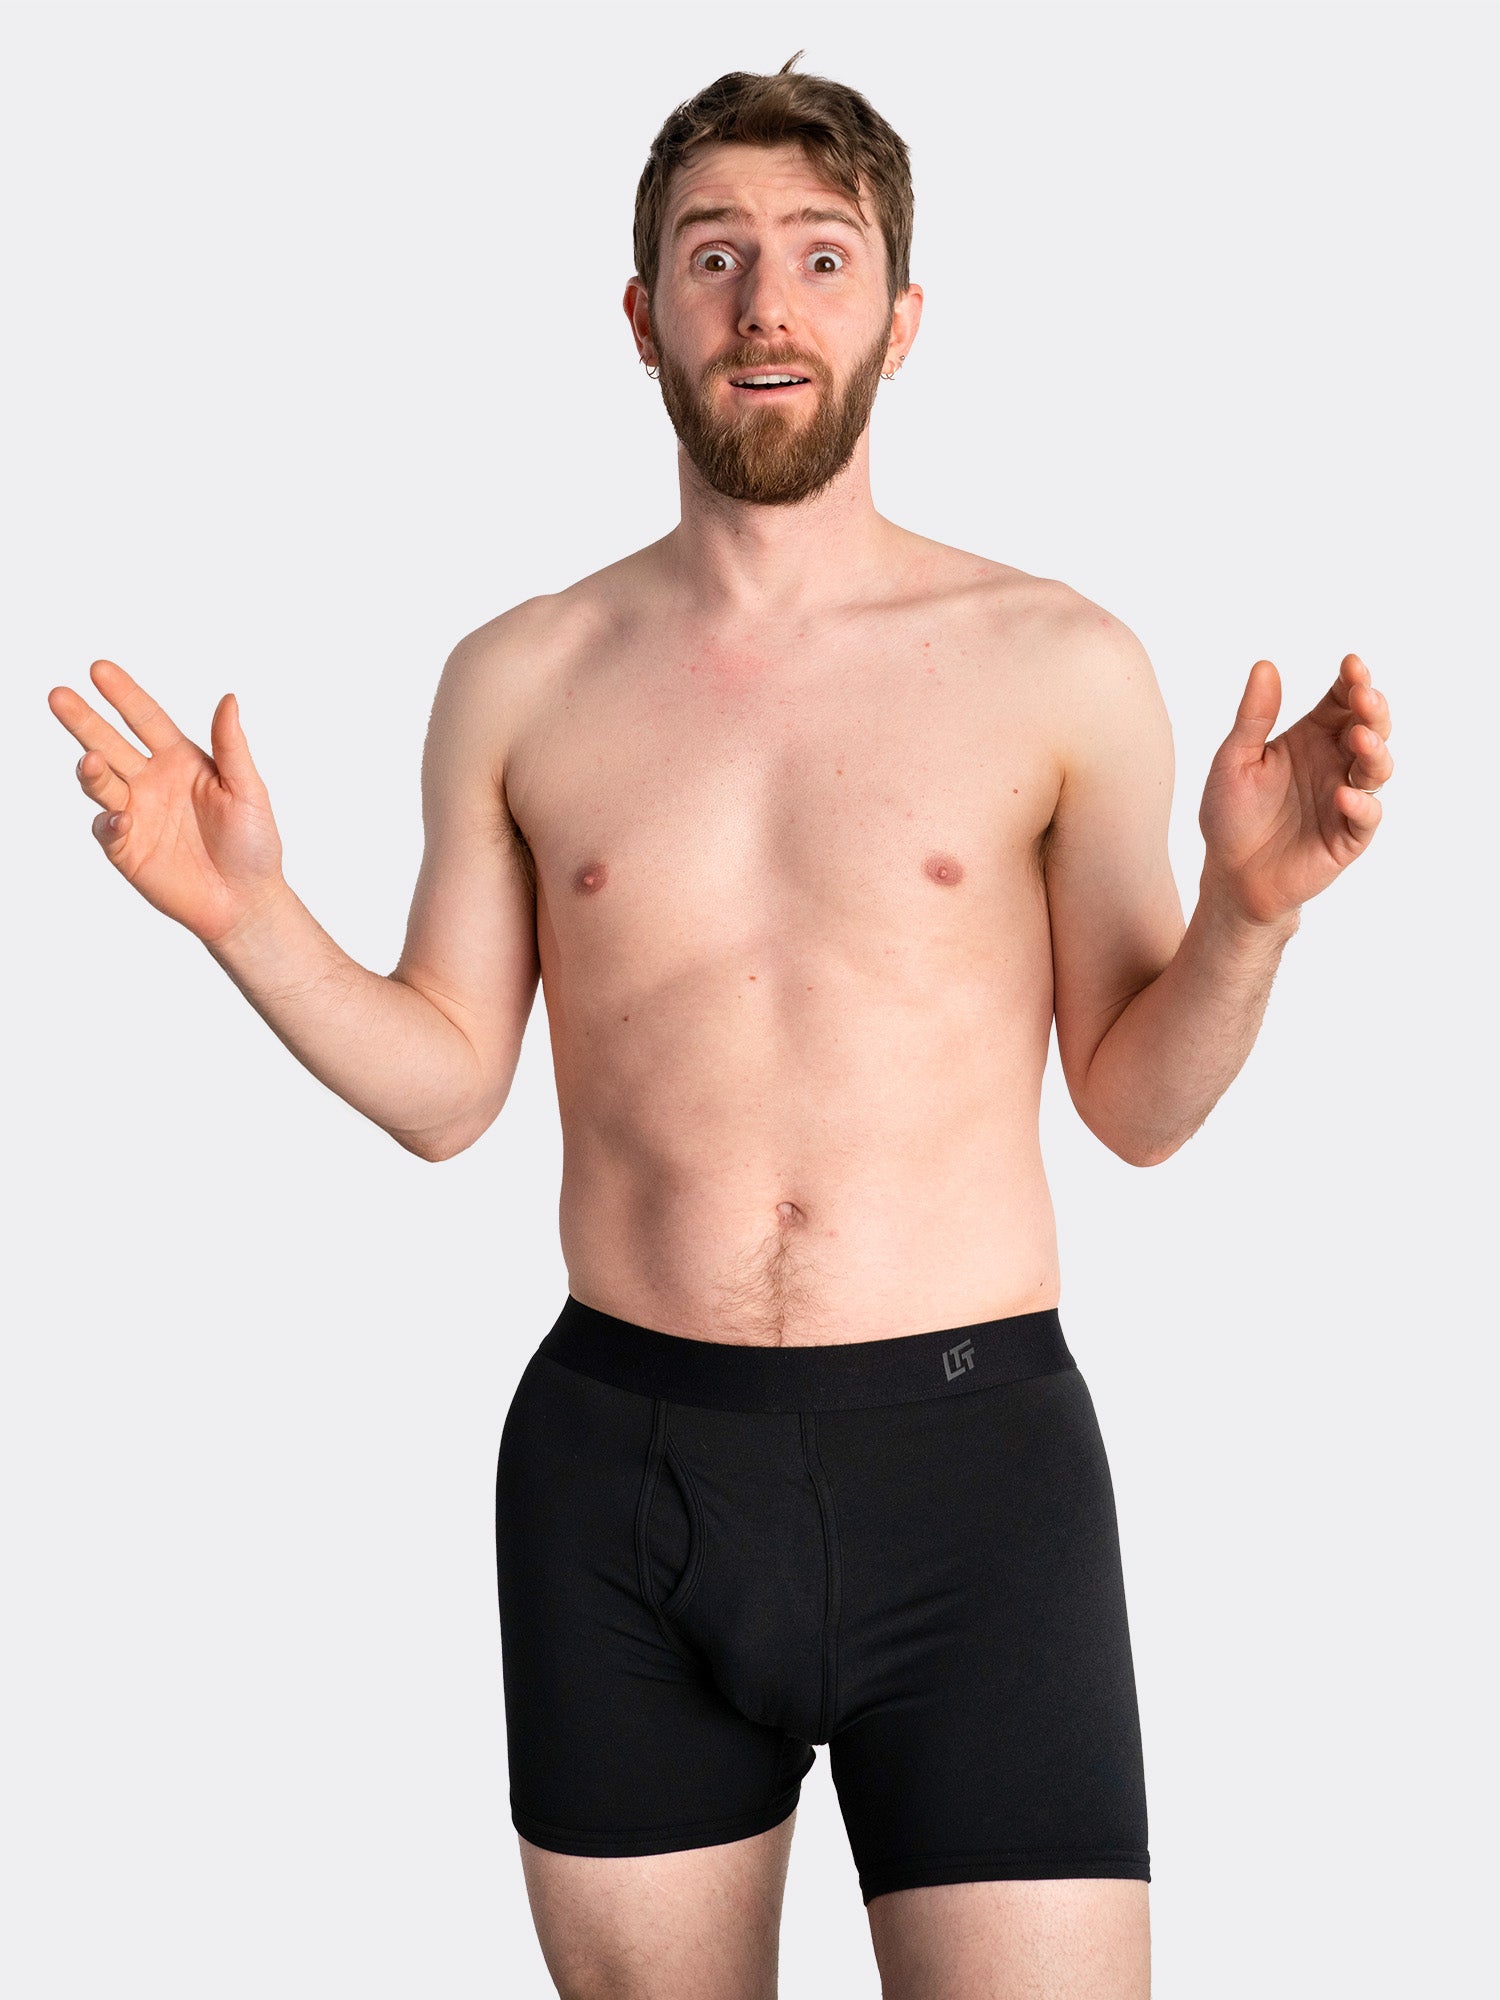 Tommy John Underwear Review - Must Read This Before Buying